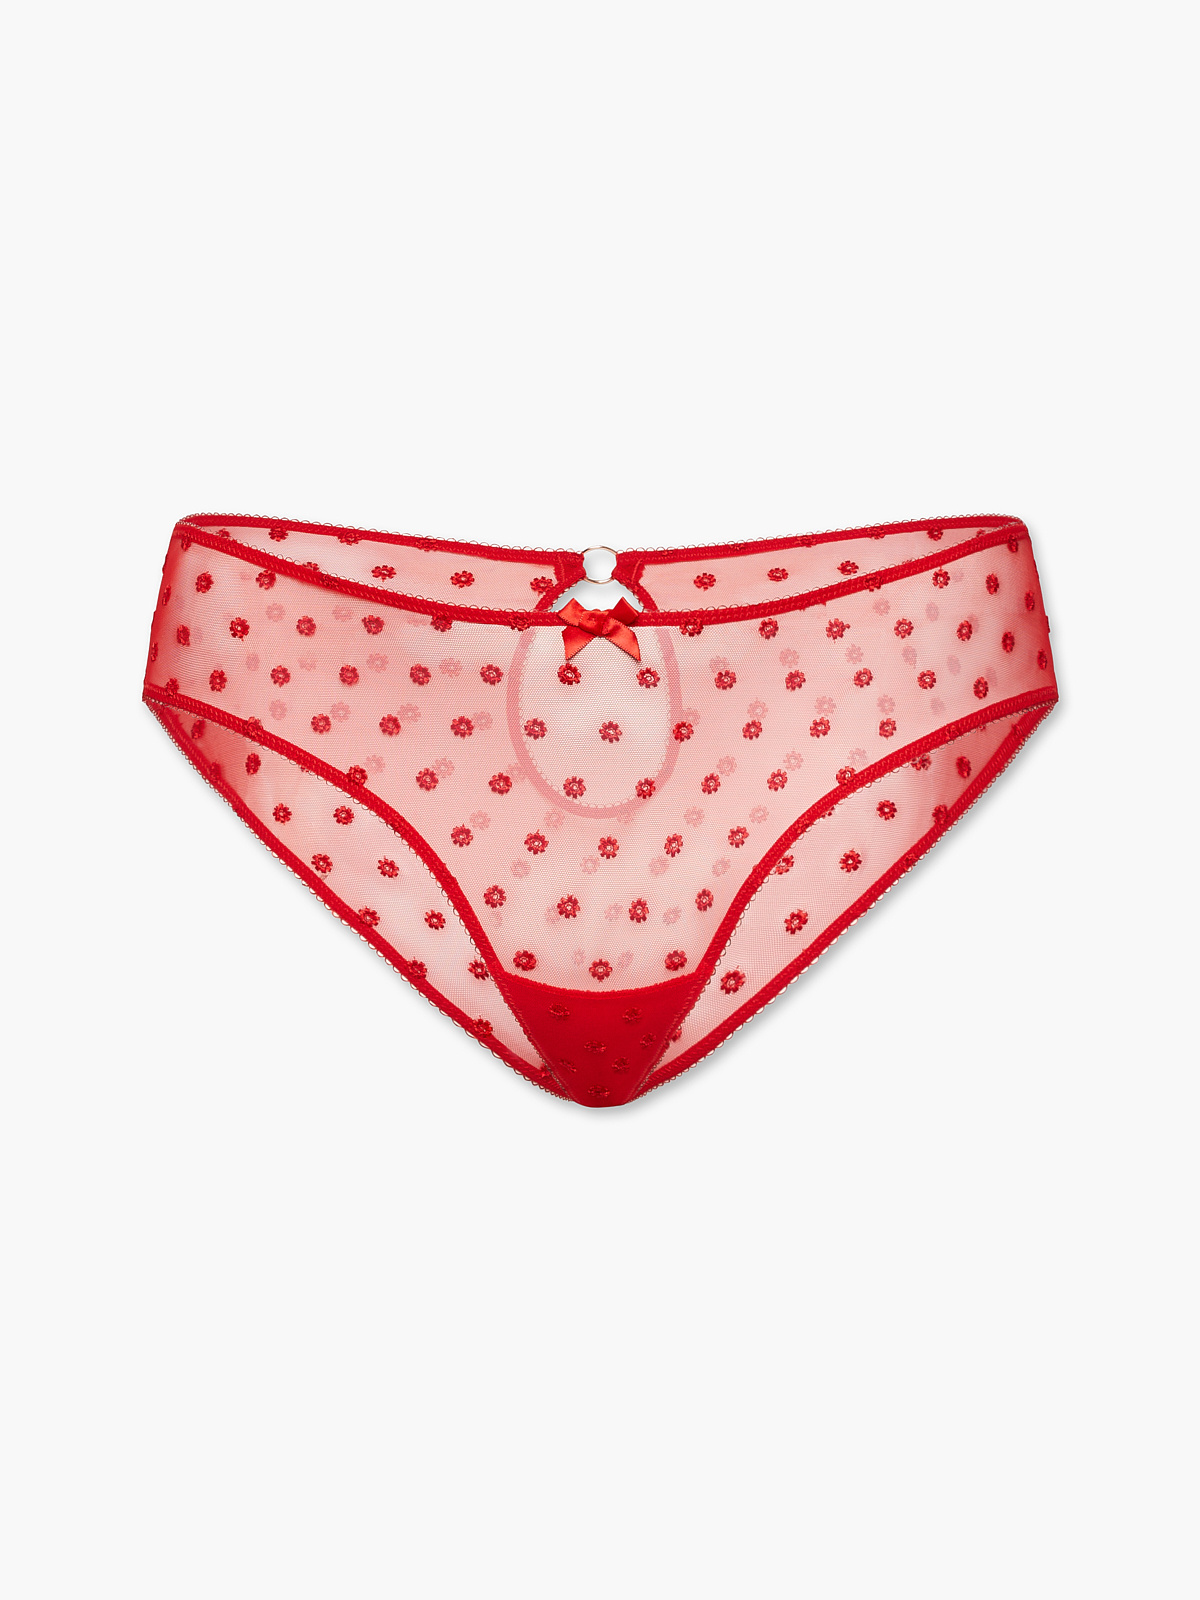 Victoria's Secret Very Sexy Heart Back Cheeky Panty with Polka Dot Mesh,  Women's Underwear, Red (XL) at  Women's Clothing store